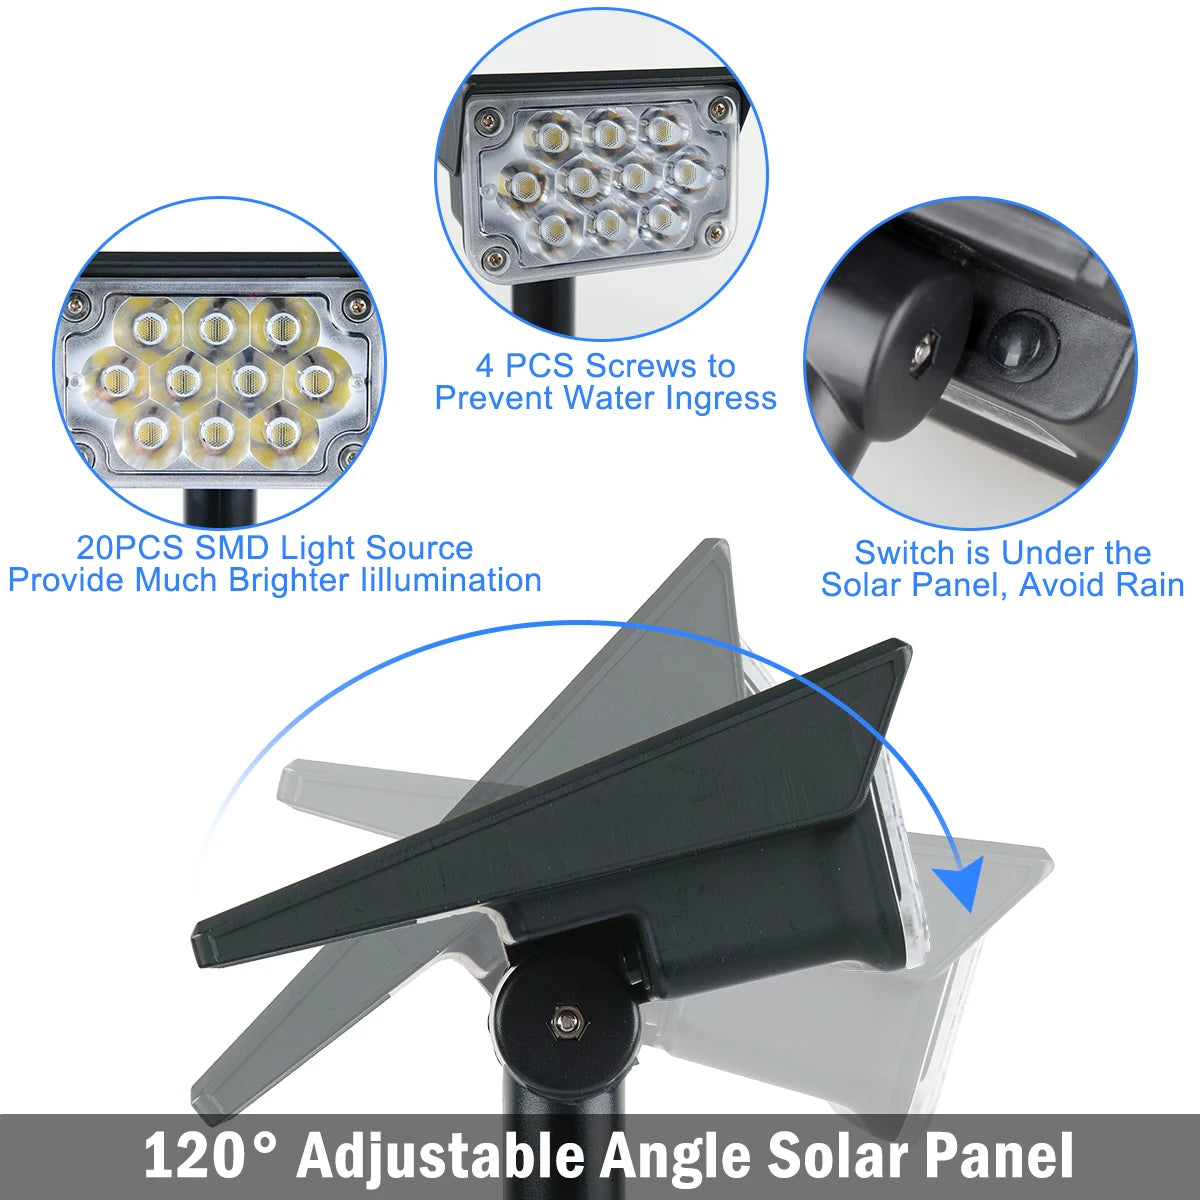 1/2/4PCS Solar Power Light, Solar-powered garden light with water-resistant design and adjustable angle for bright illumination.